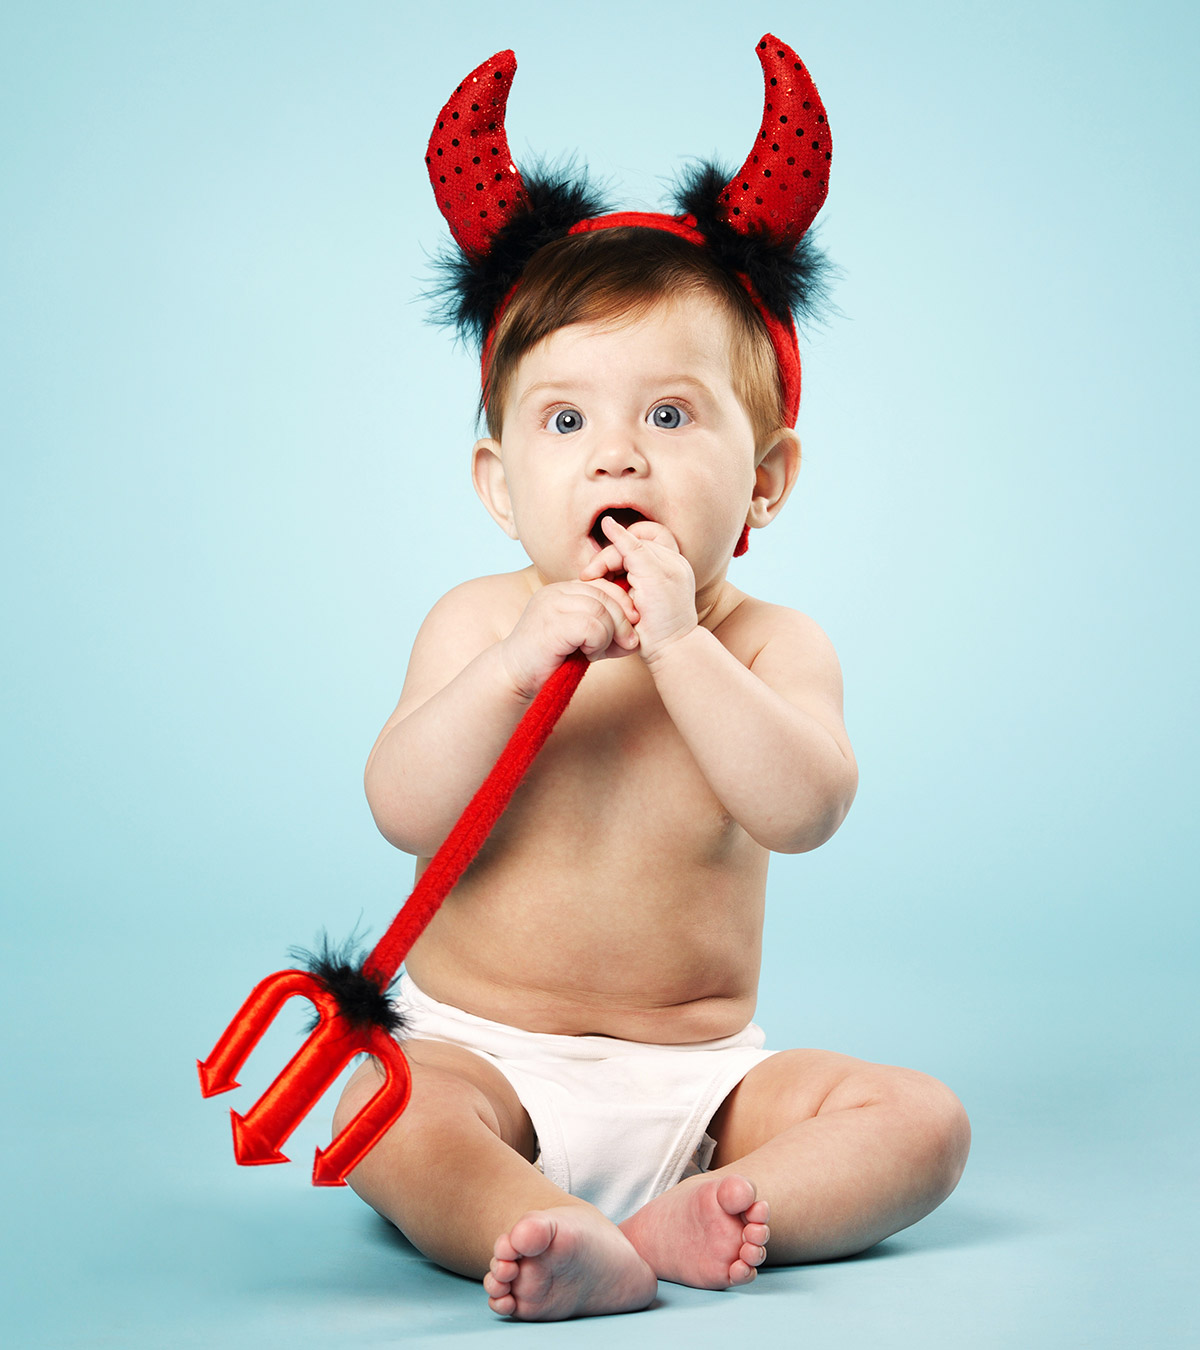 60 Evil, Vampire And Demon Baby Names - Any Takers?